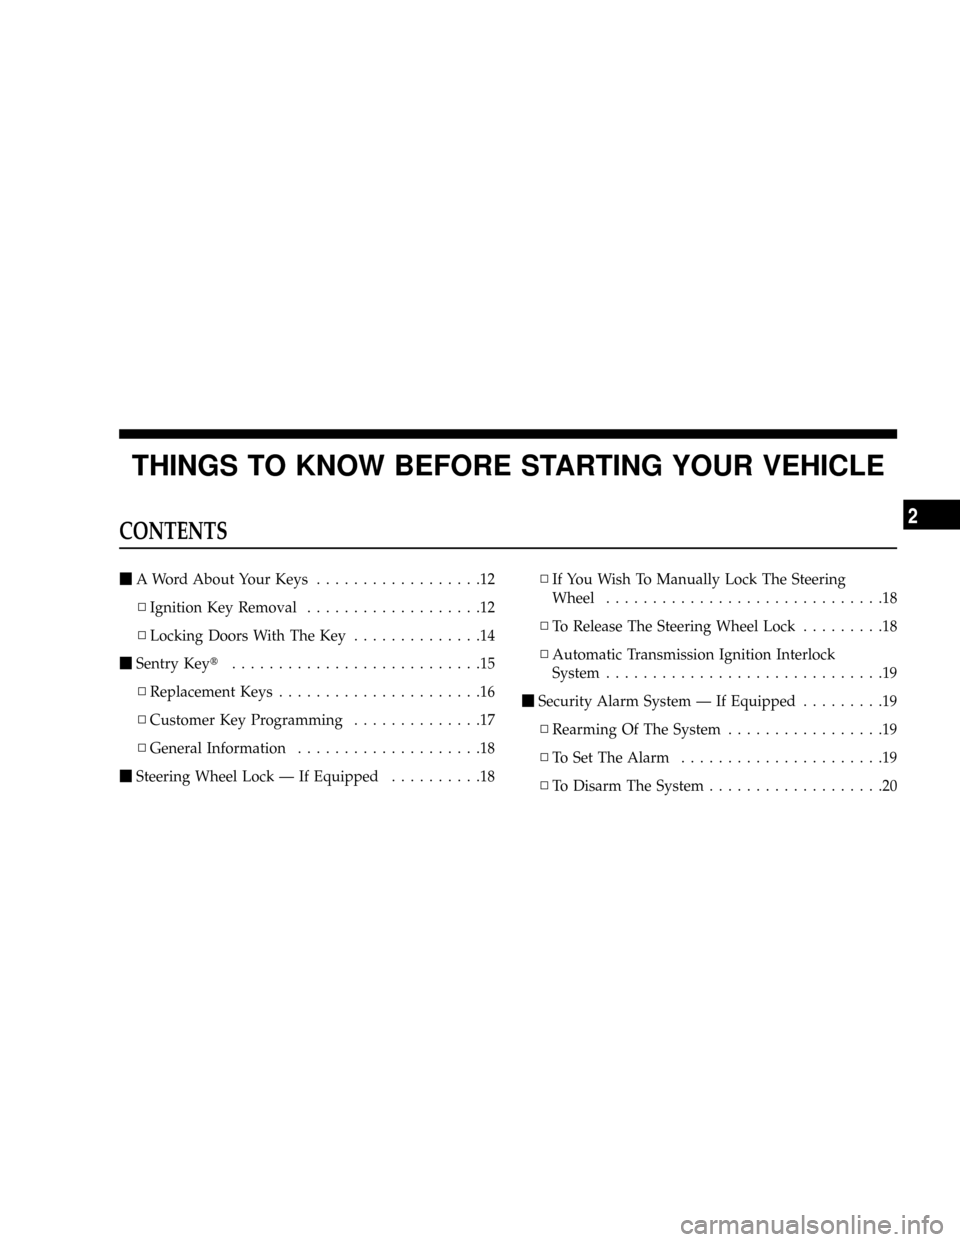 DODGE RAM 3500 GAS 2008 3.G Owners Manual THINGS TO KNOW BEFORE STARTING YOUR VEHICLE
CONTENTS
mA Word About Your Keys..................12
NIgnition Key Removal...................12
NLocking Doors With The Key..............14
mSentry Keyt....